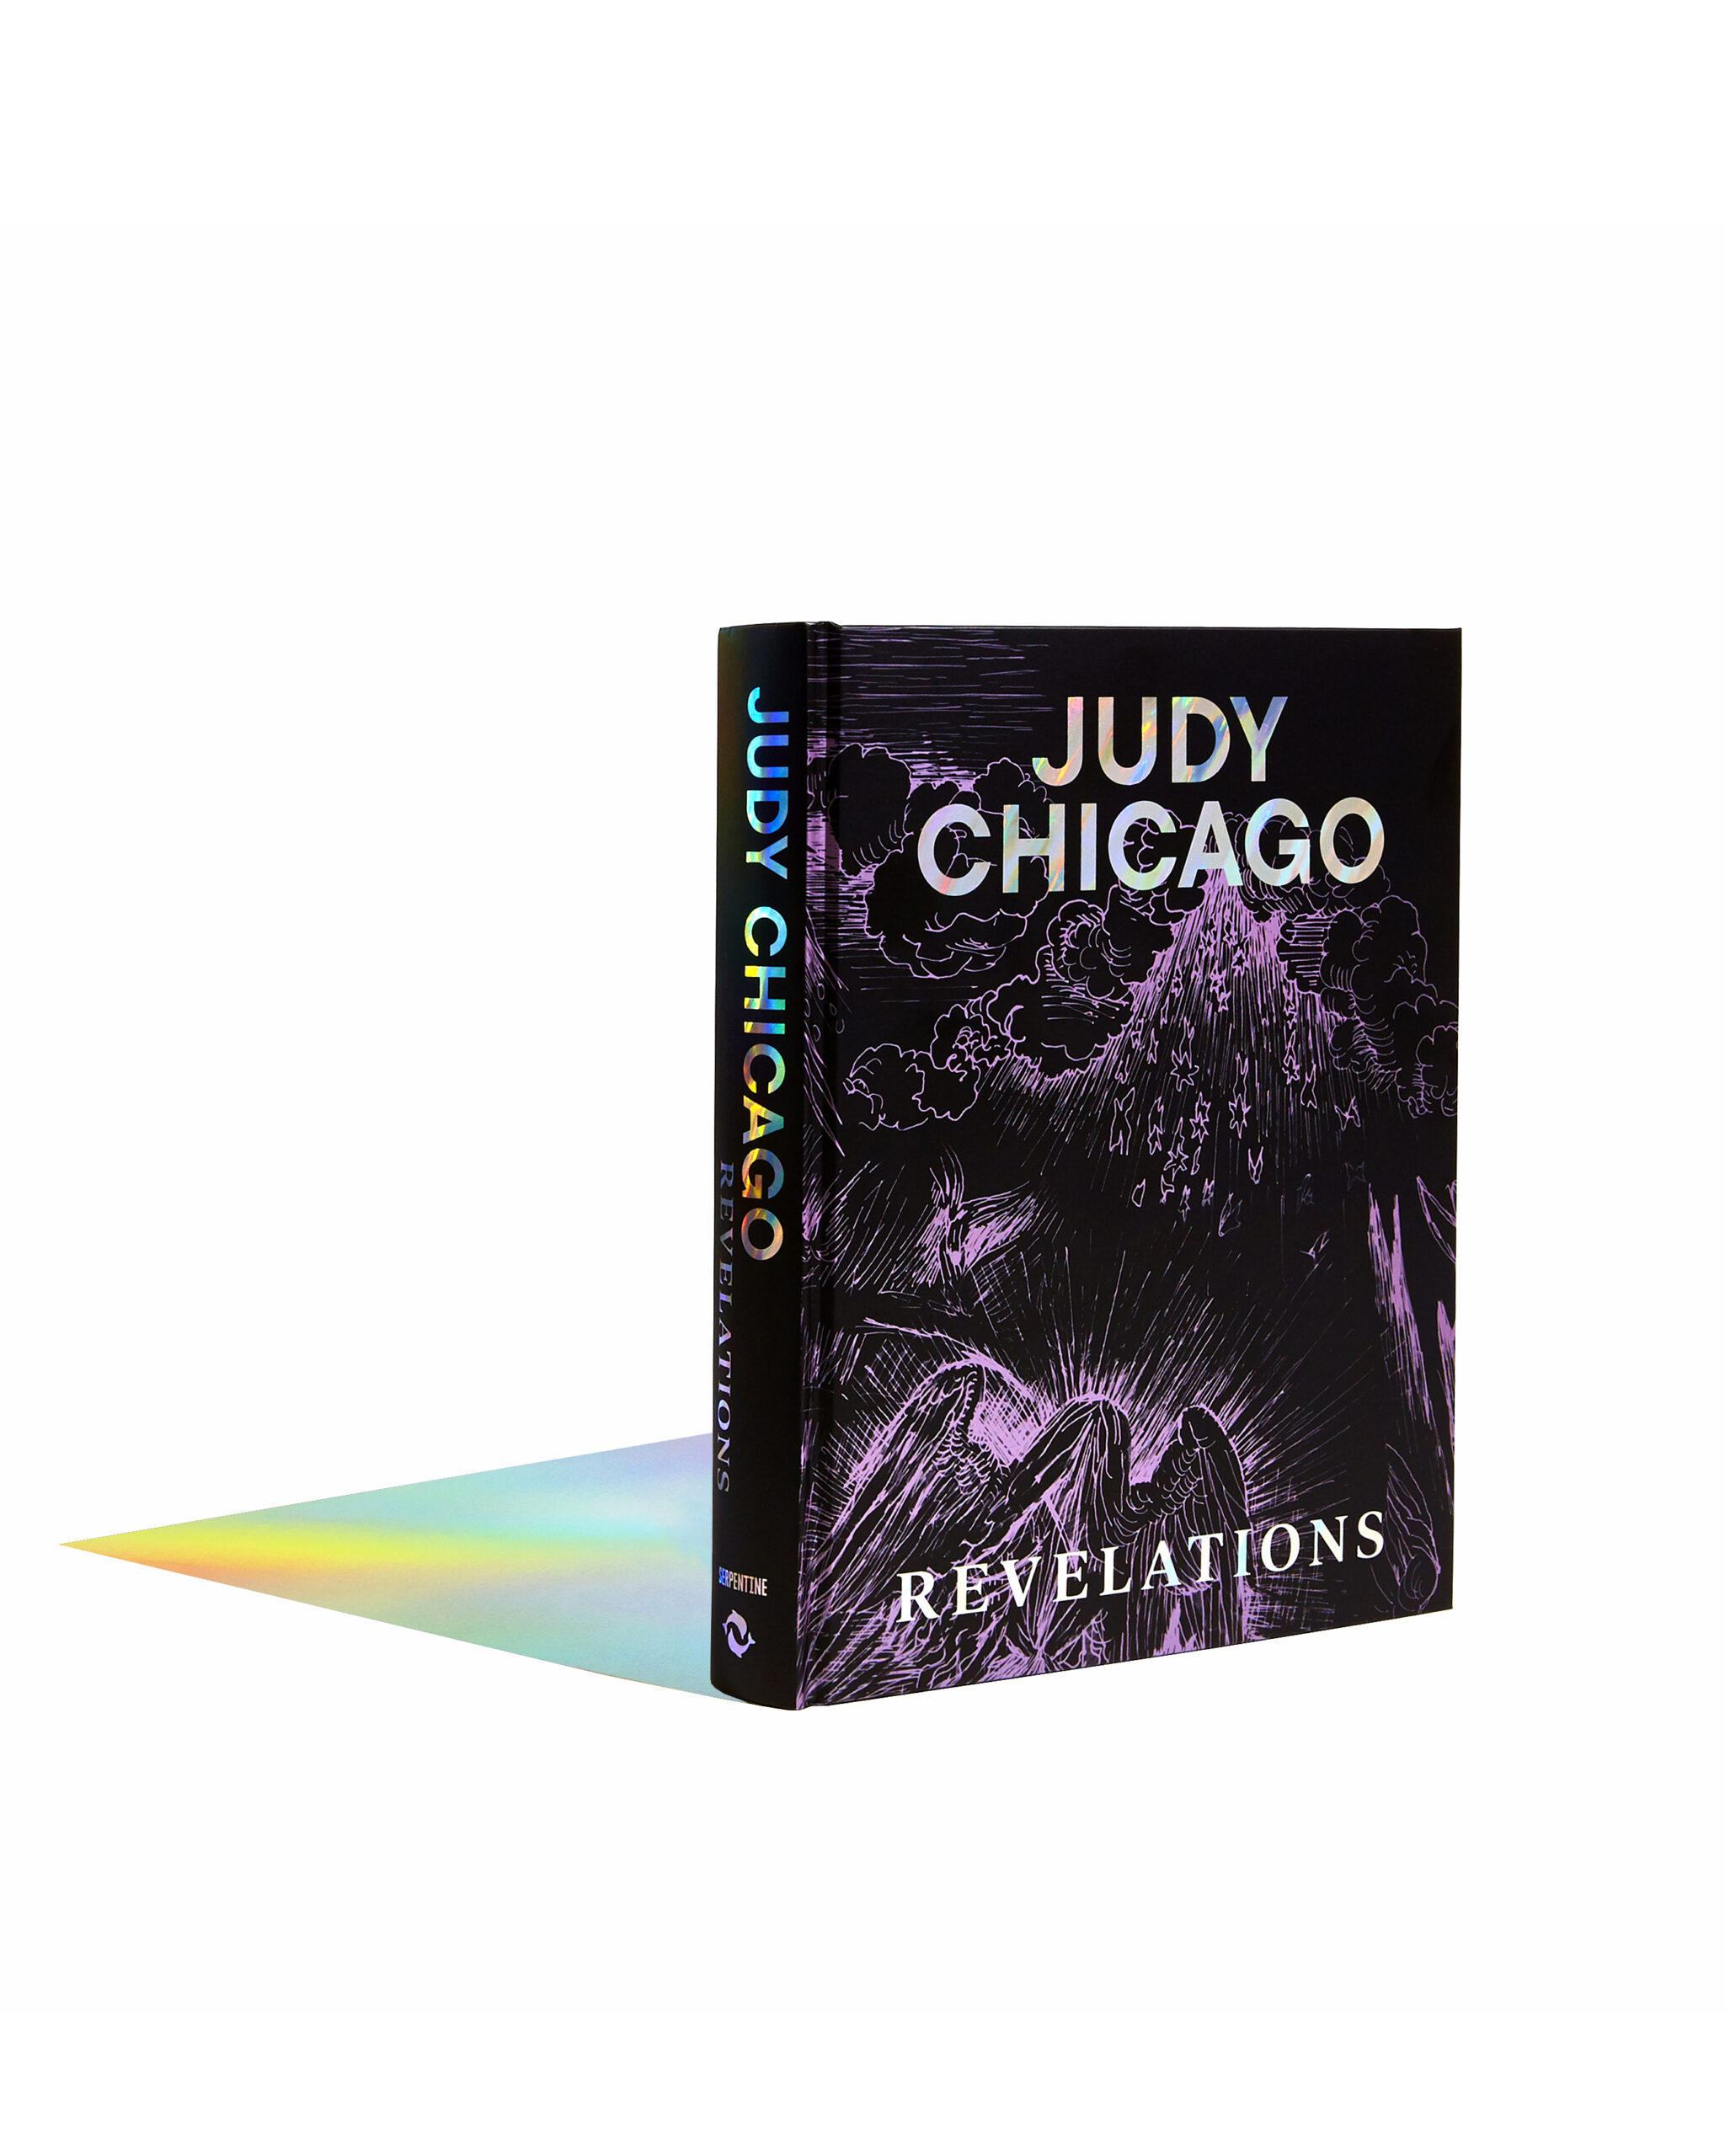 Preorder a SIGNED copy Judy Chicago: Revelations